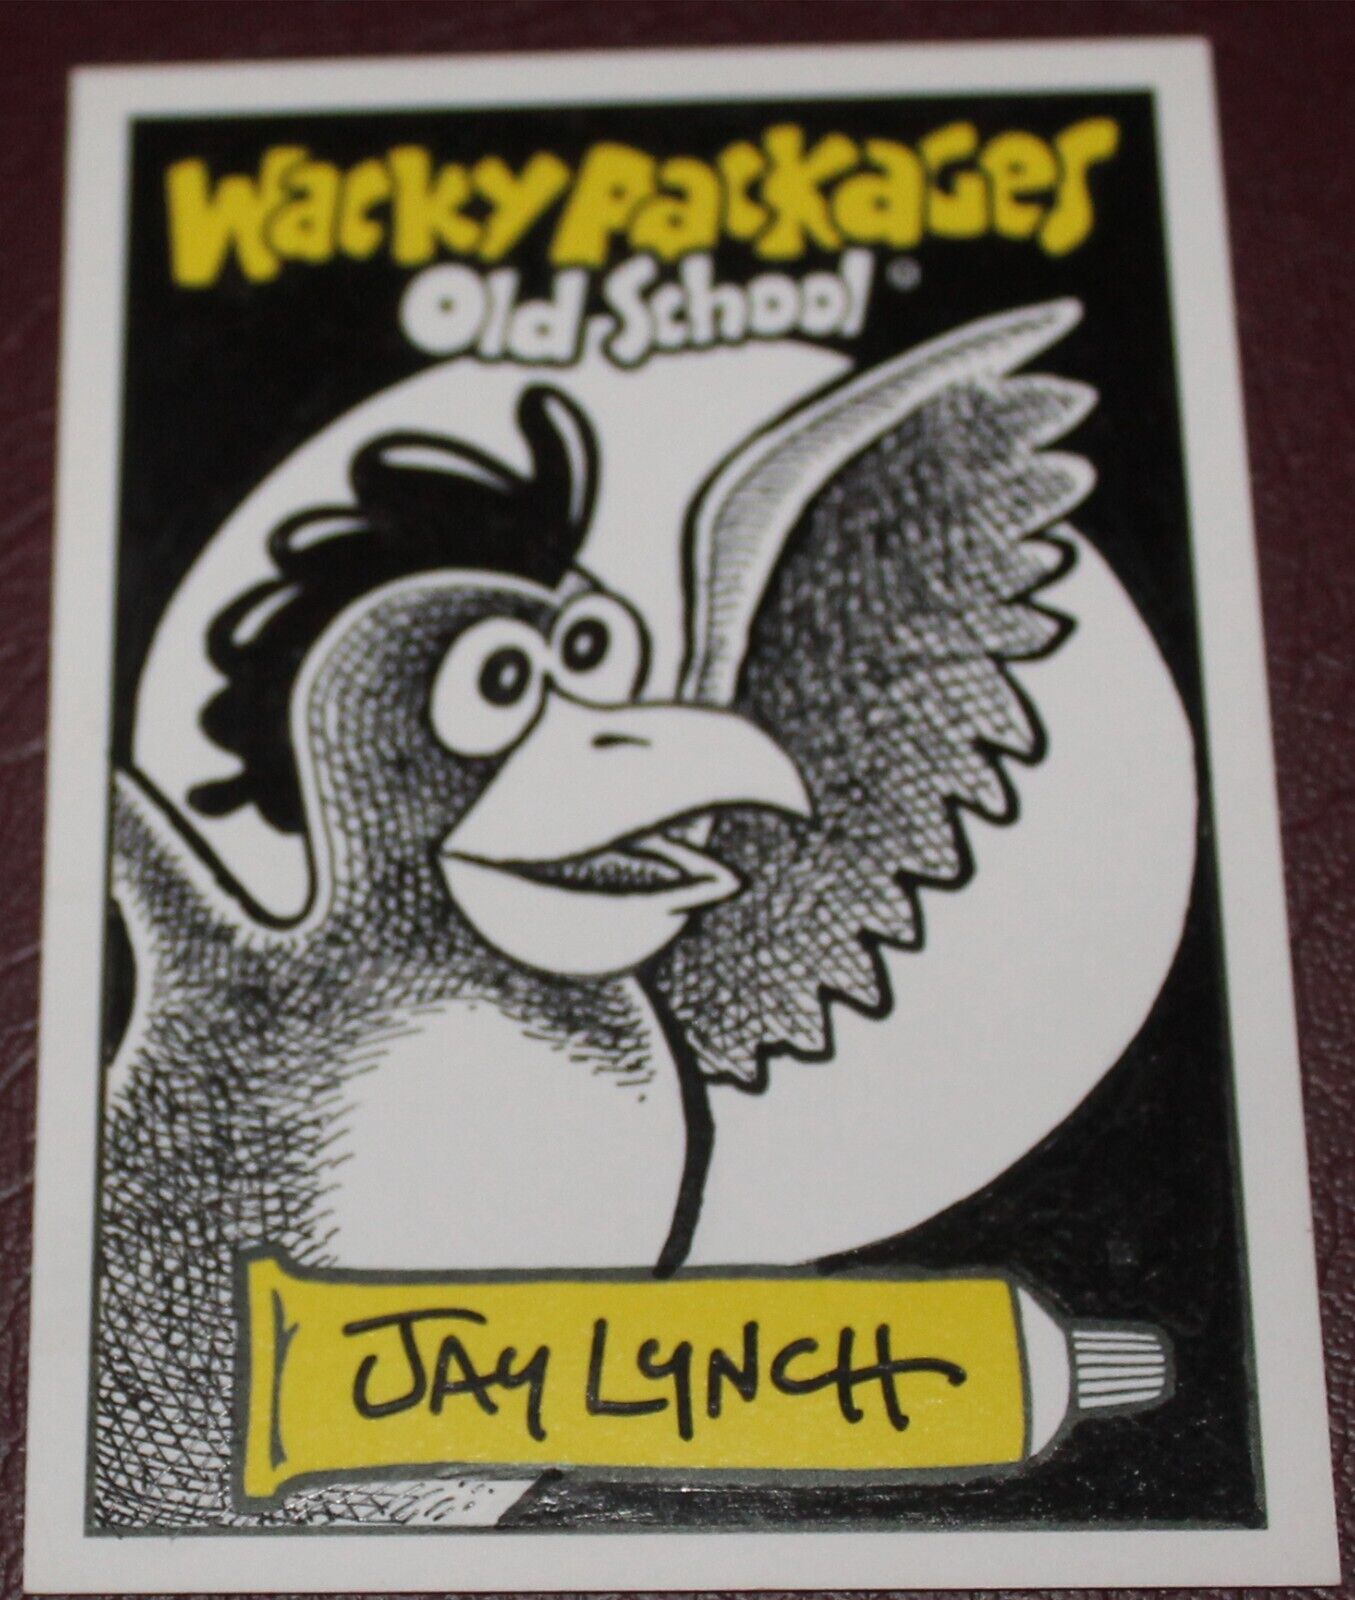 2010 Topps Wacky Packages Sketch Card Old School 1 Chicken Fat Jay Lynch